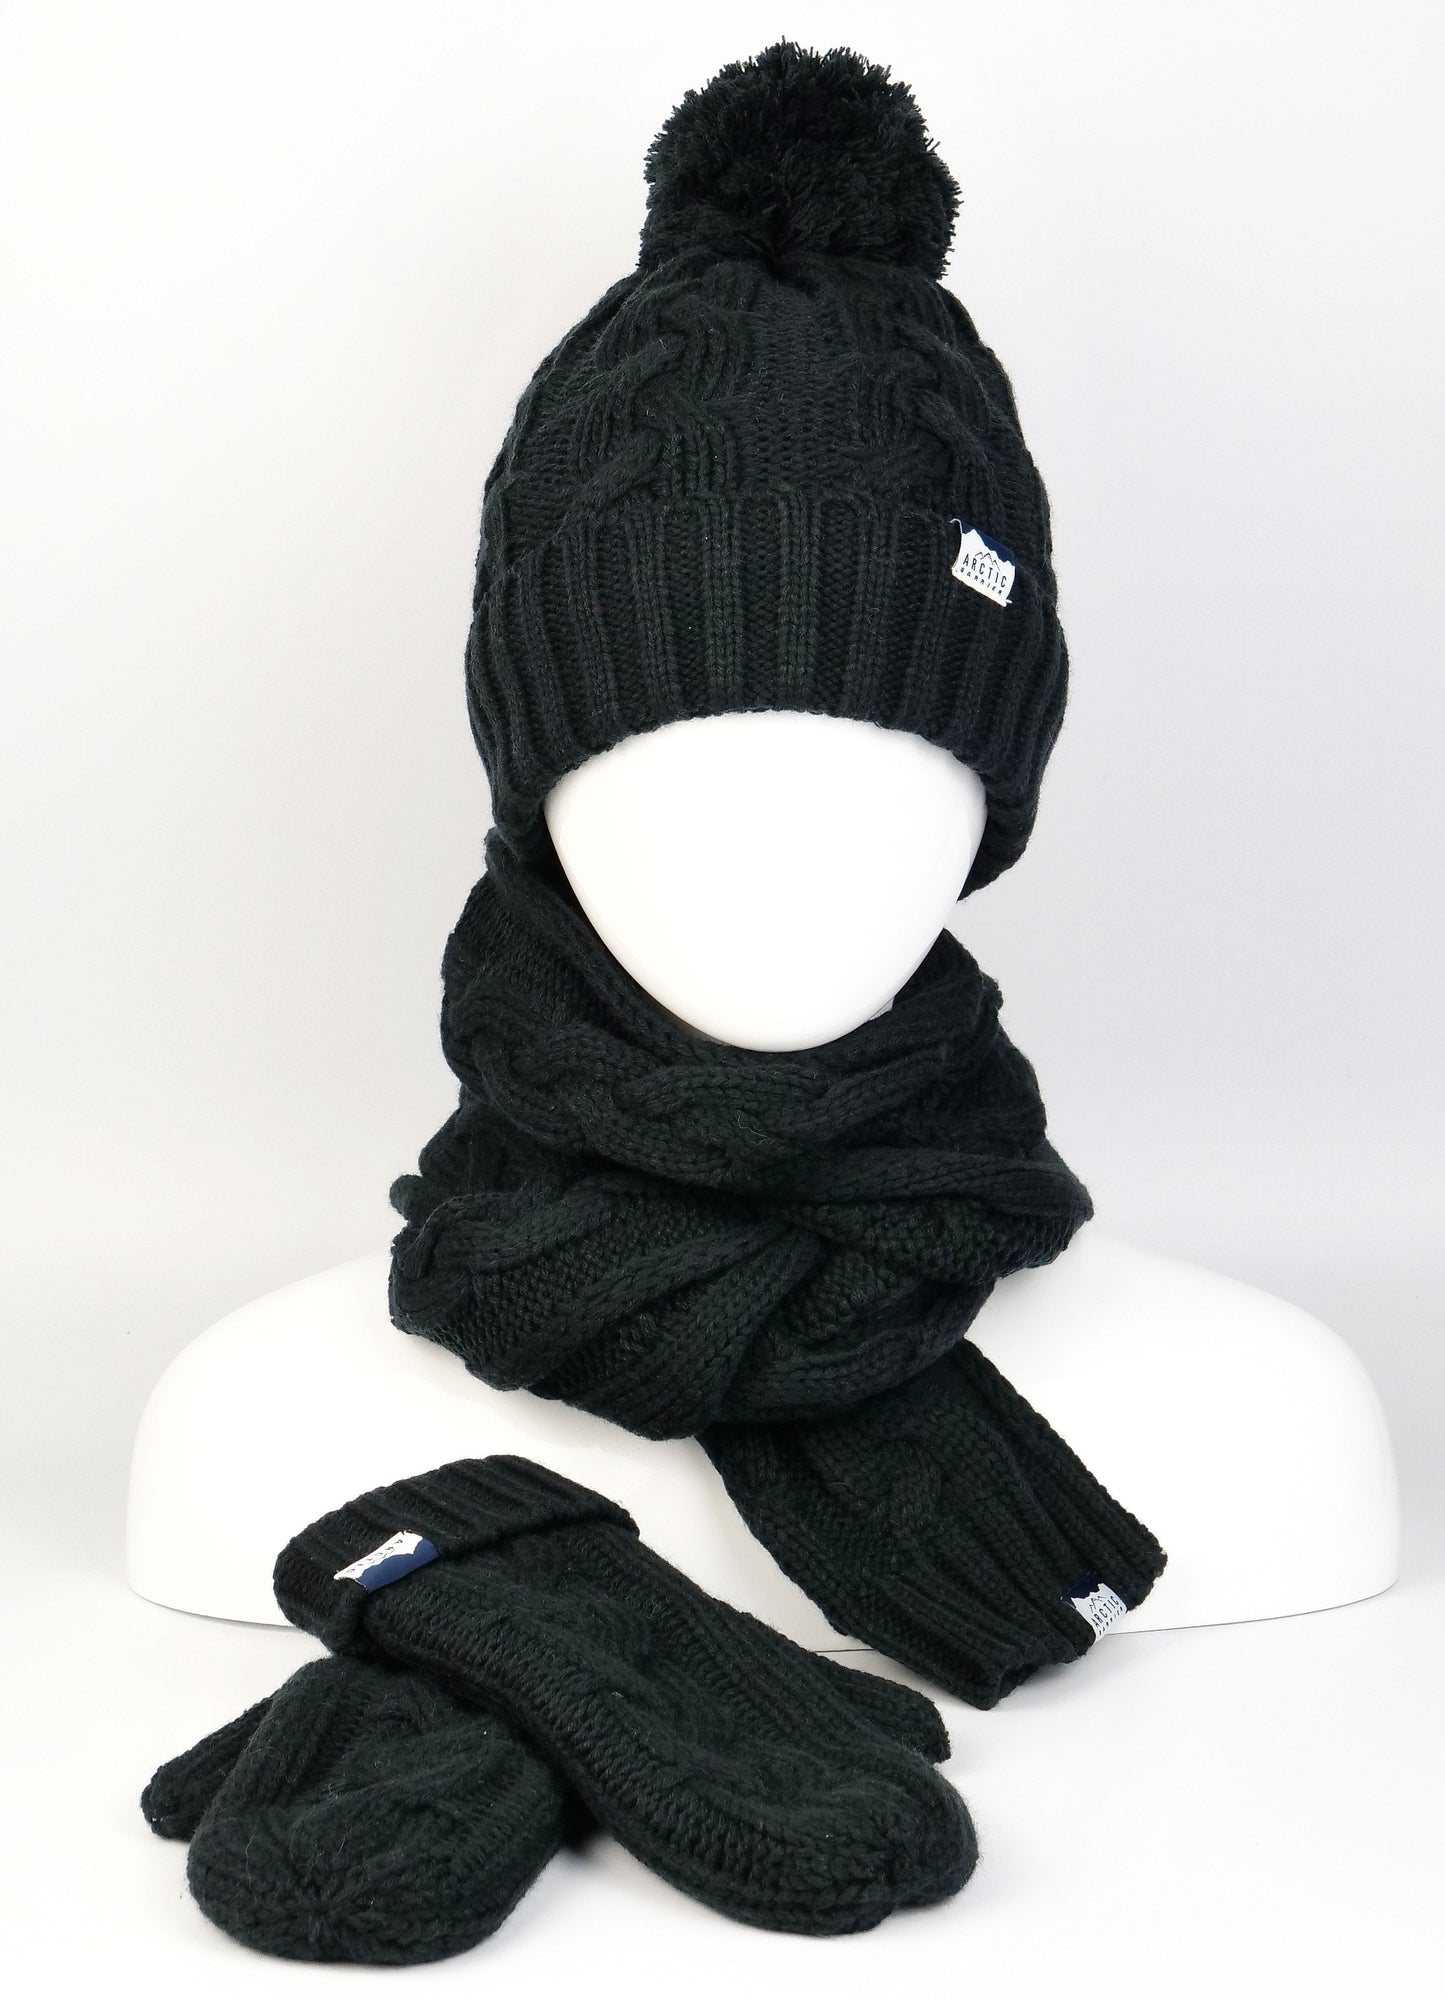 WOMEN 3PC Knitted SET: POM BEANIE, SCARF AND MITTEN